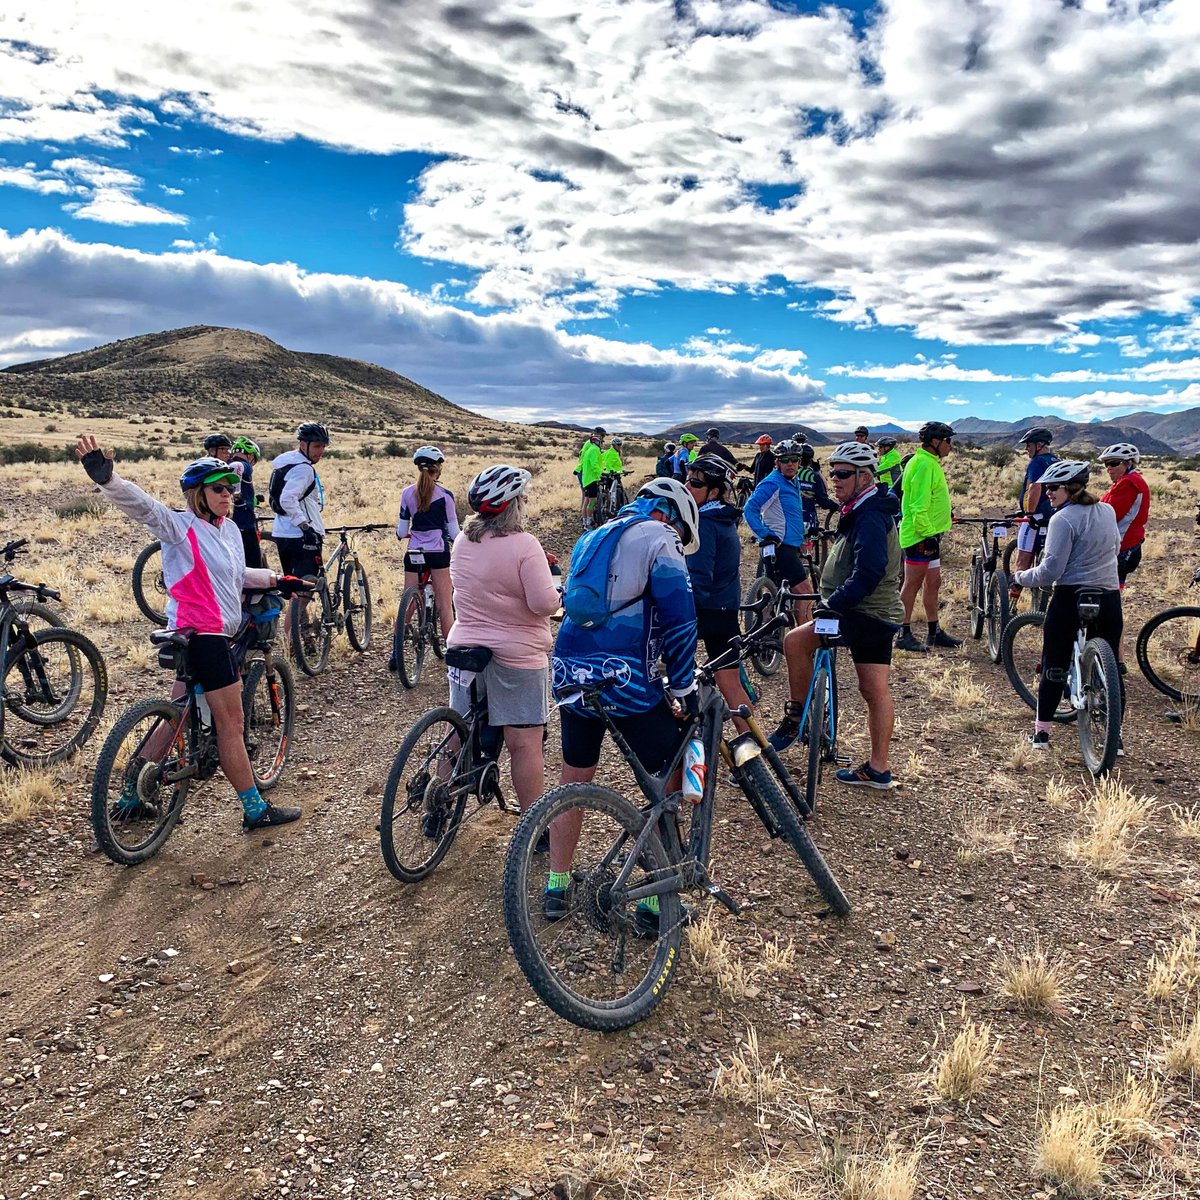 A regroup in neutral zone. Generally you ride at your own pace with a predetermined route, on rare occasions the 'chief domestique' calls for 'Neutral Zone' were the group gathers to navigate farms and unmarked territory.
.
#karoogravelgrinder
#cycletouring #adventurecycling